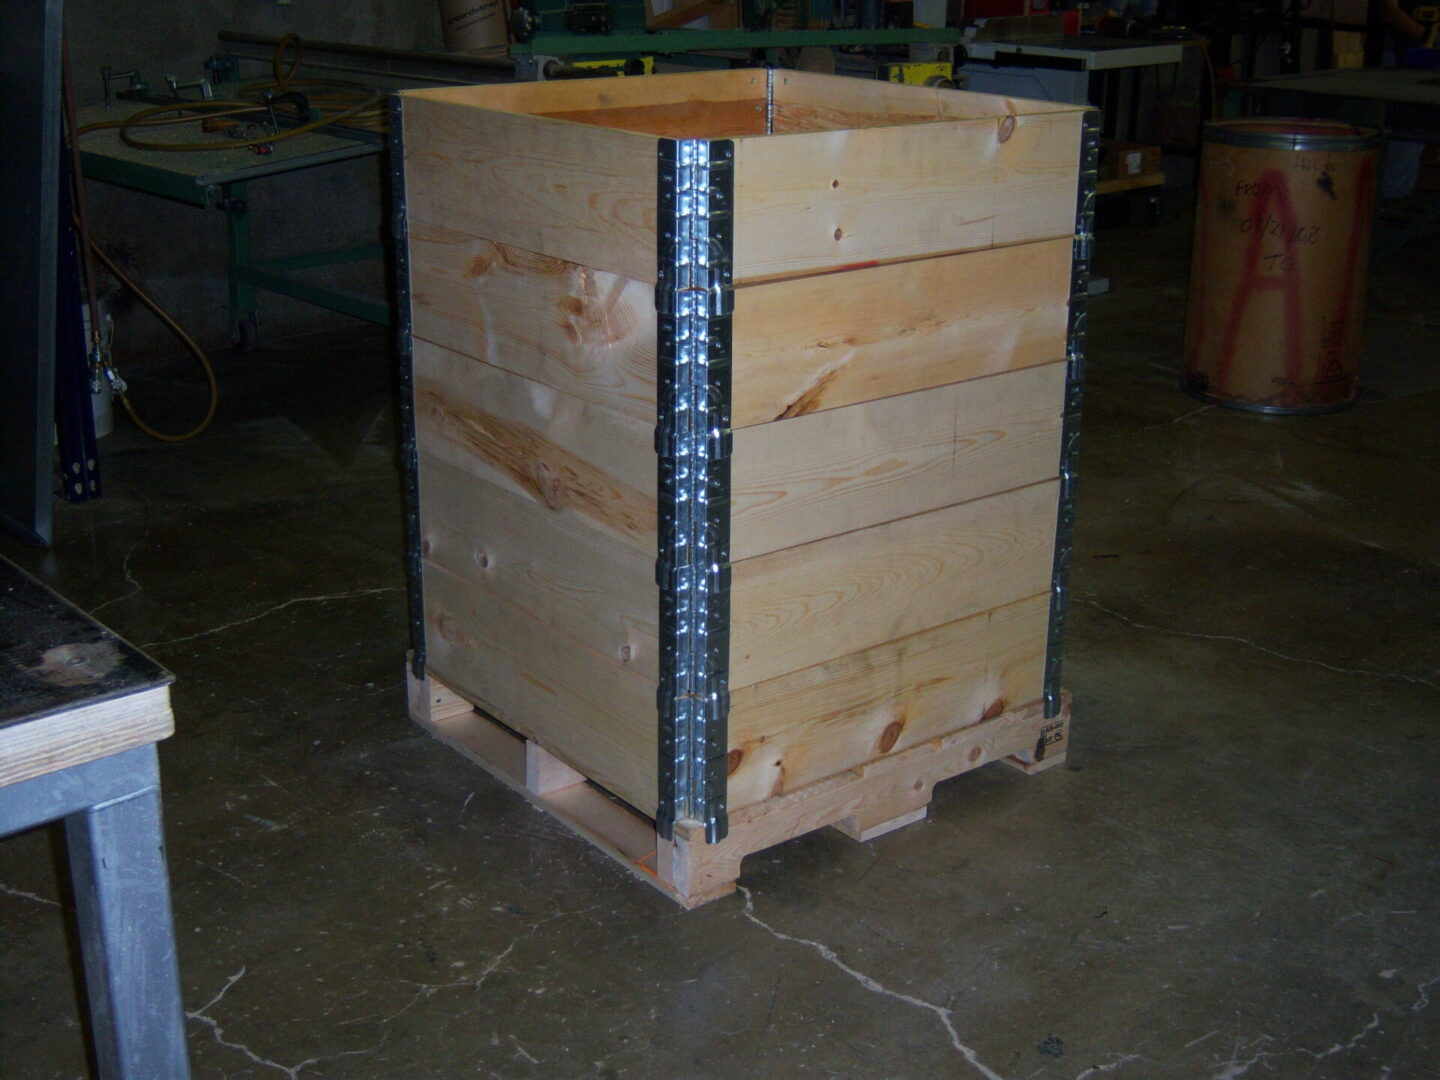 A wooden crate with metal straps around the top.